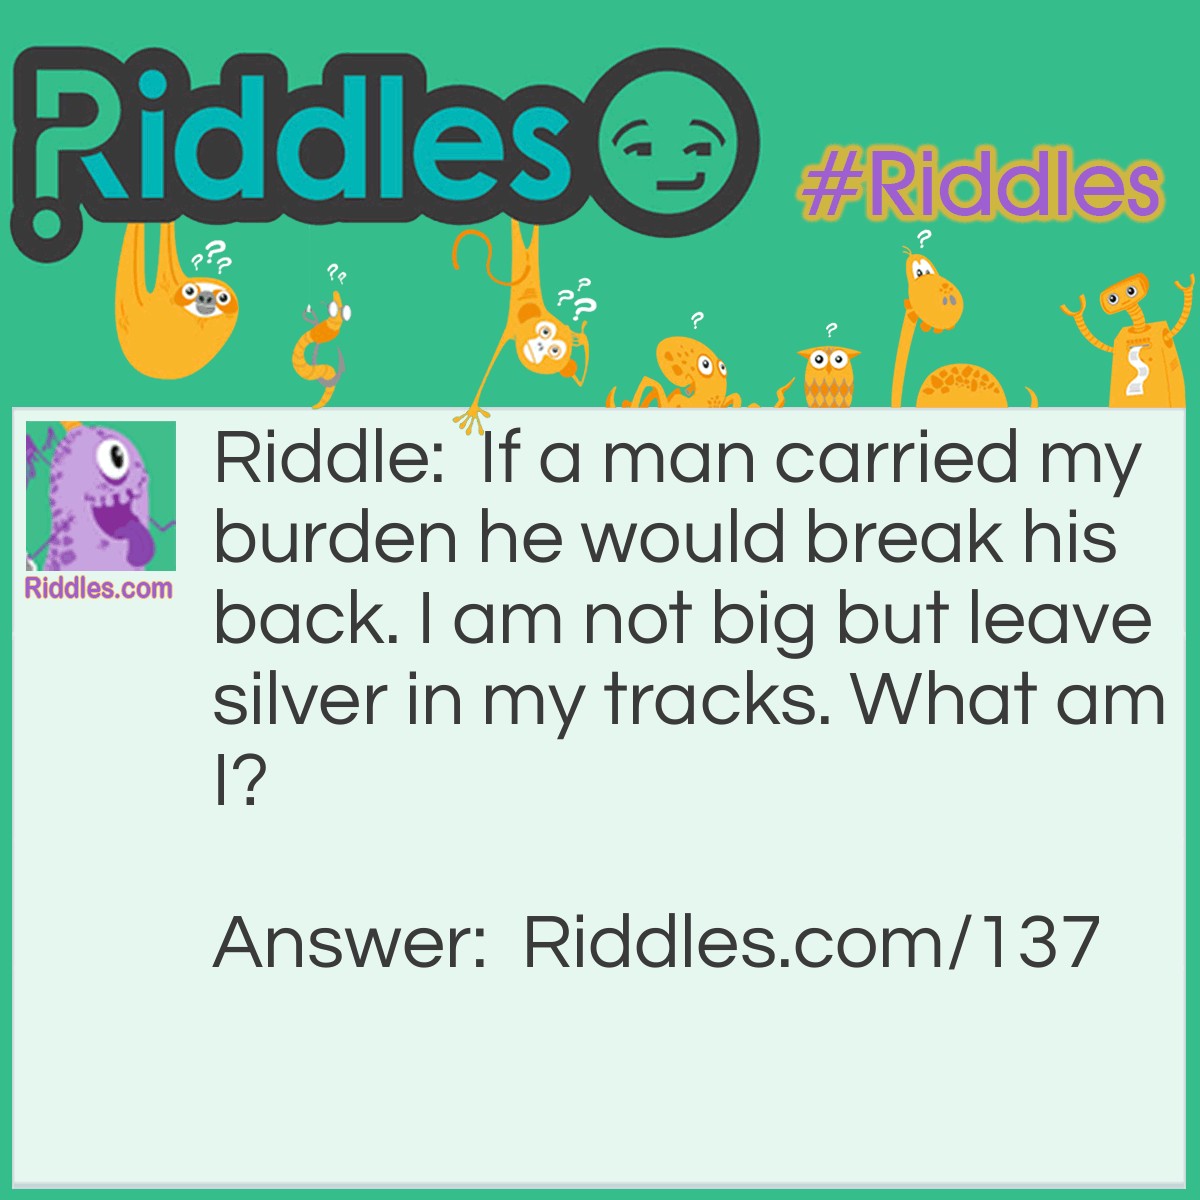 Riddle: If a man carried my burden he would break his back. I am not big but leave silver in my tracks. What am I? Answer: A snail.